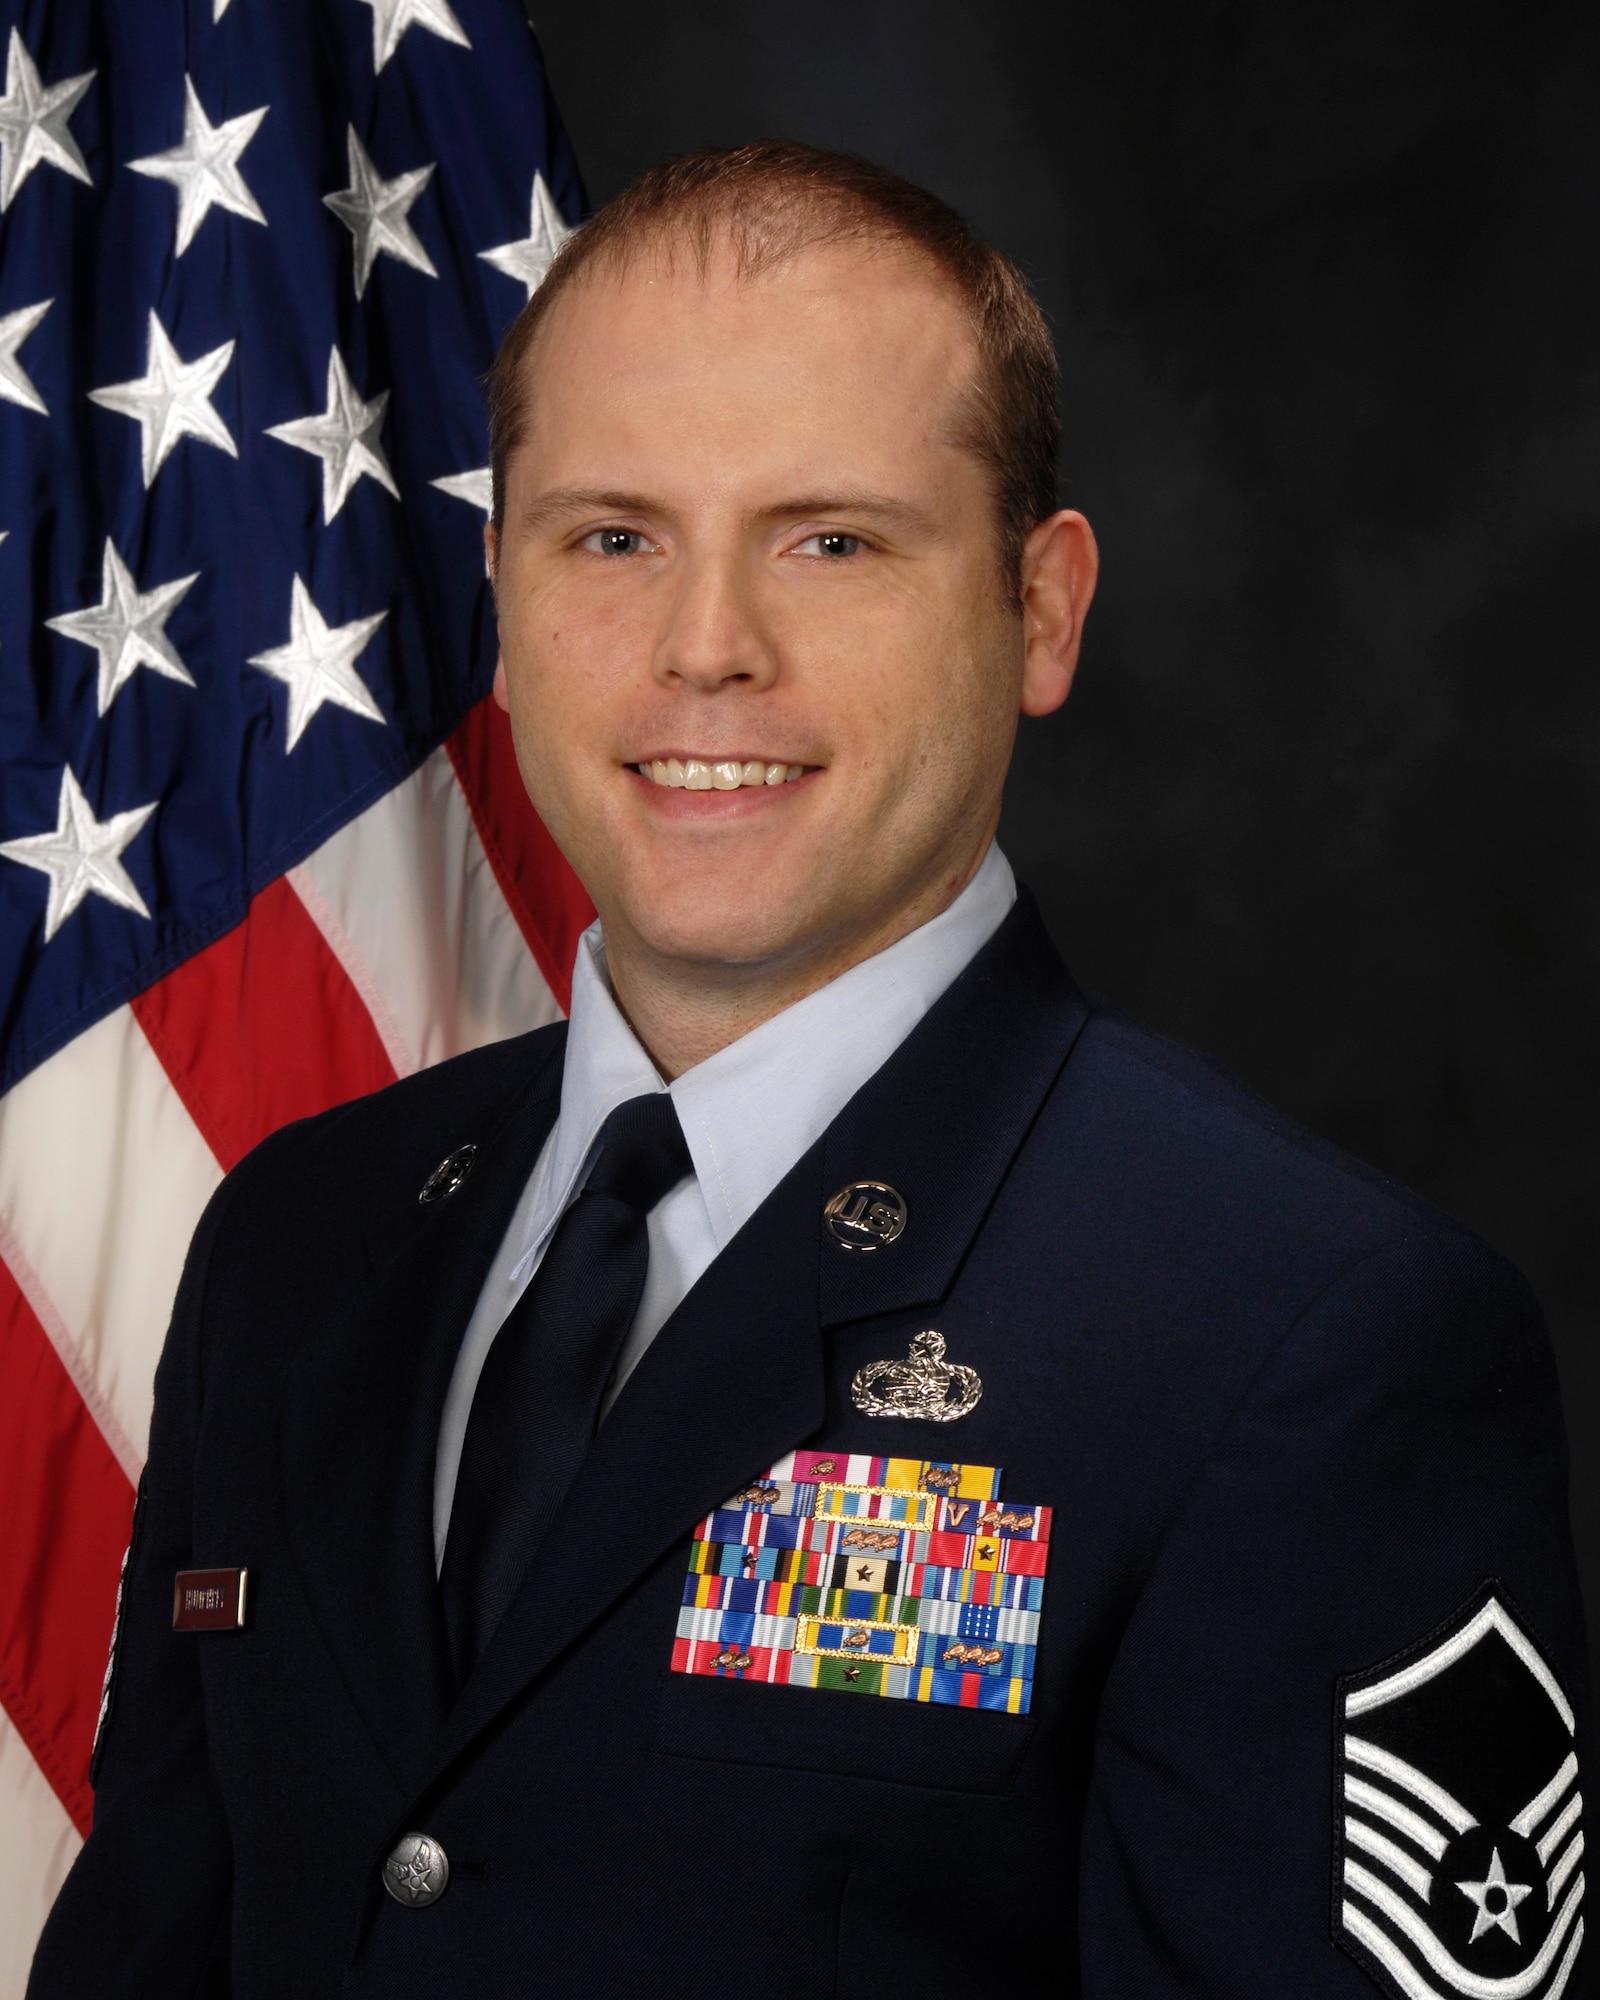 Master Sgt. William L. Humphrey, Air Force Institute of Technology, is the Air University Senior NCO of the Year for 2008. (Air Force photo)